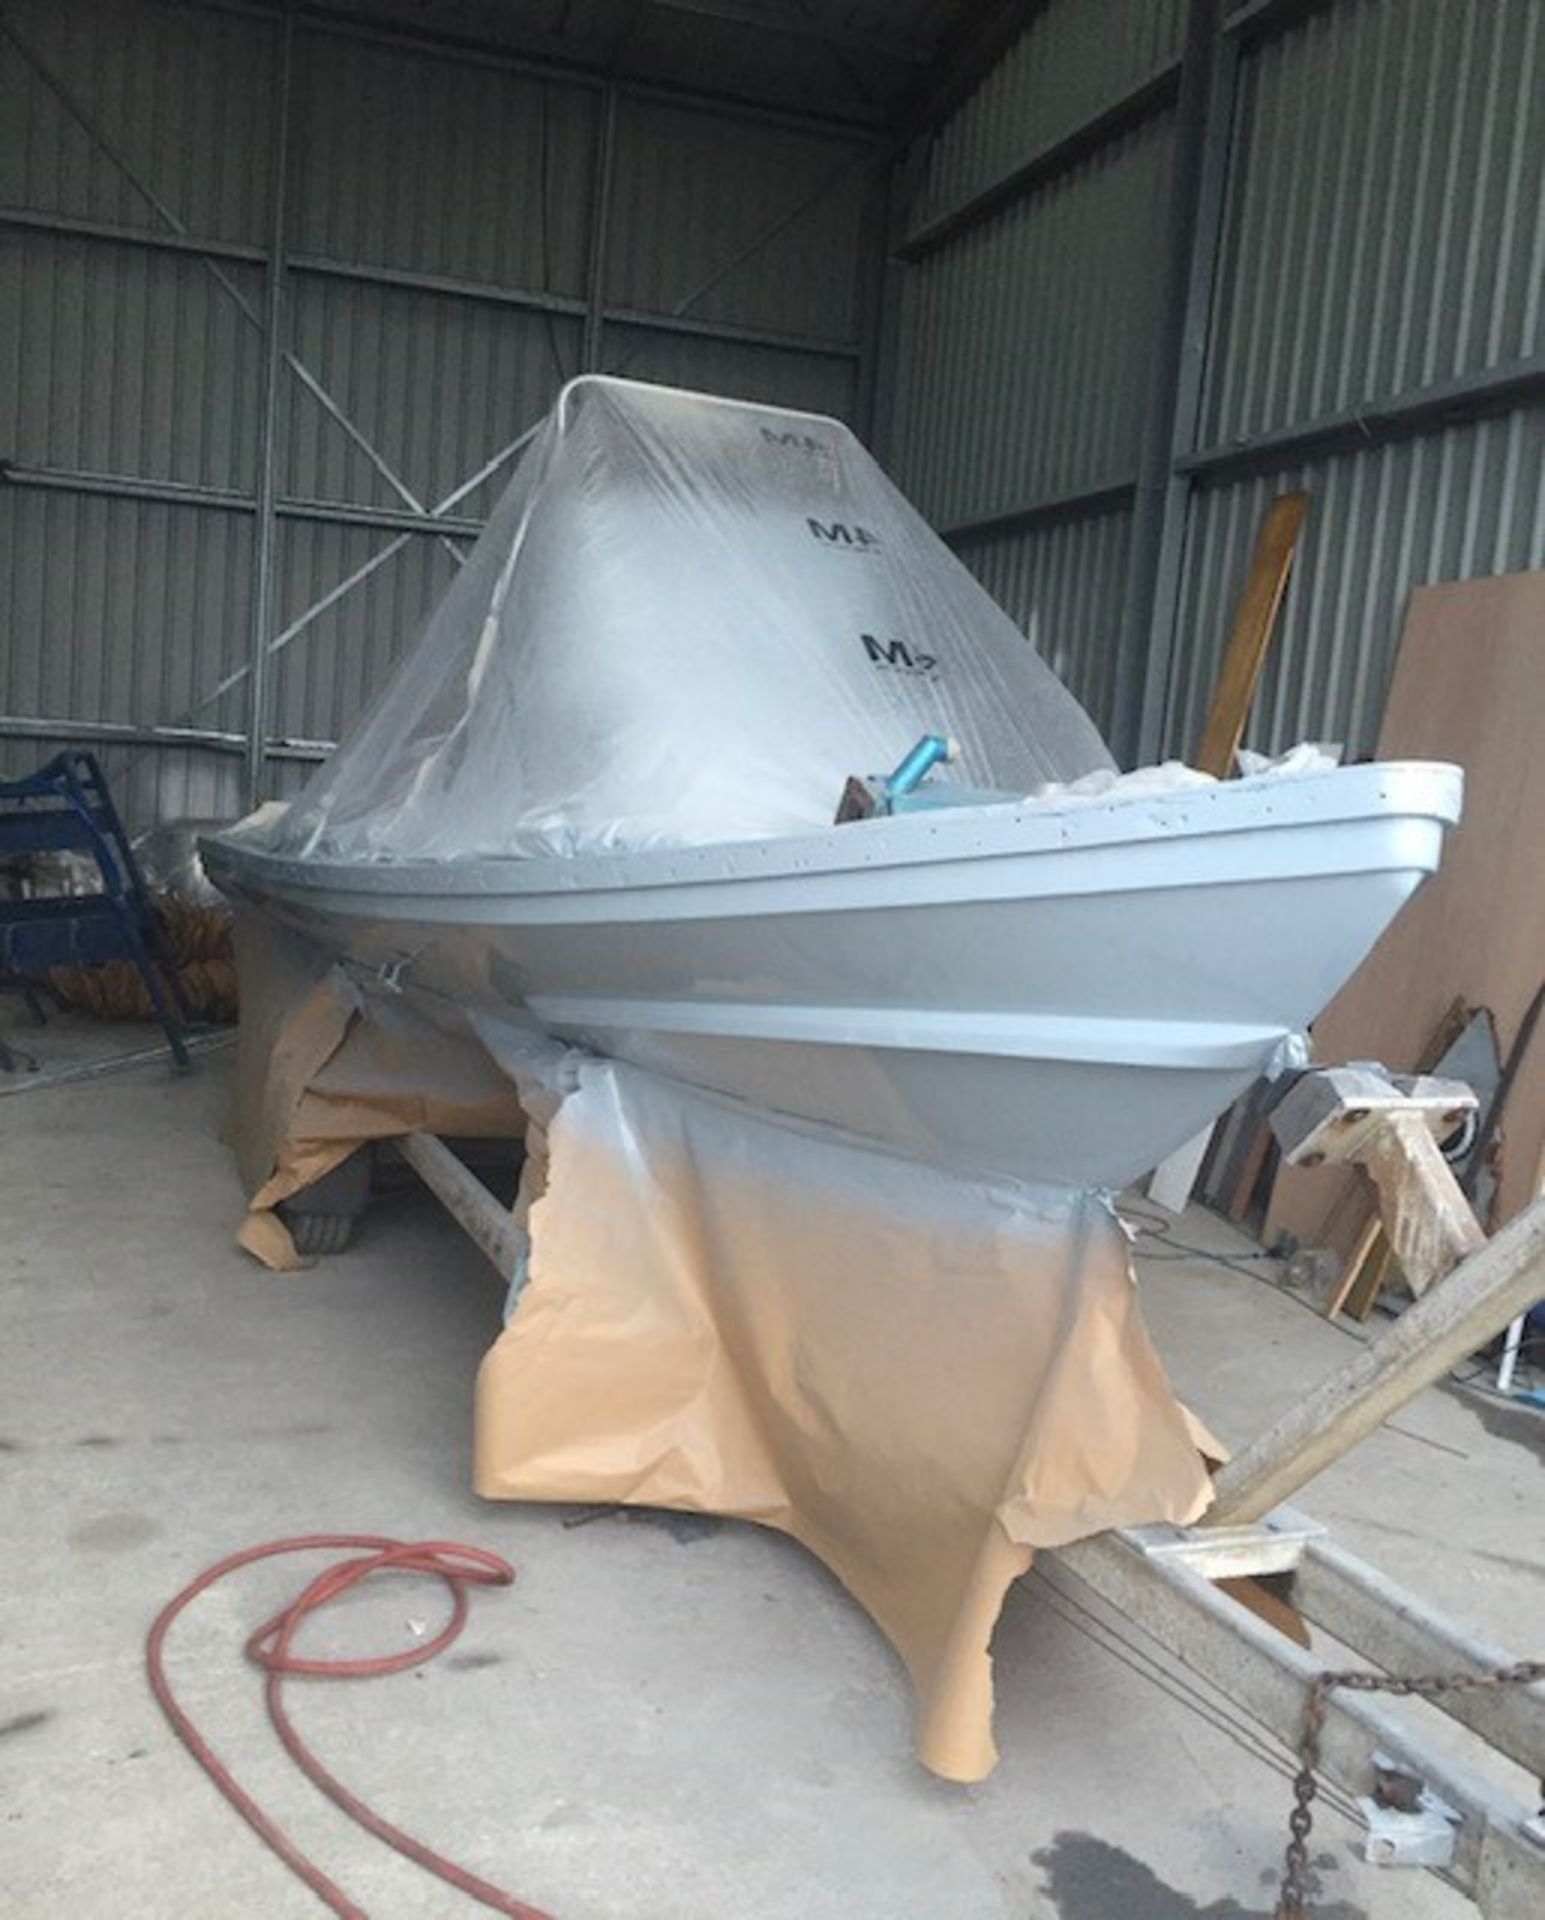 PACIFIC 22 MARINE RIB, 4CYL FORD DIESEL C/W GALVANISED TWIN AXLE TRAILER **FULL REBUILD DONE 3 YEARS - Image 9 of 10